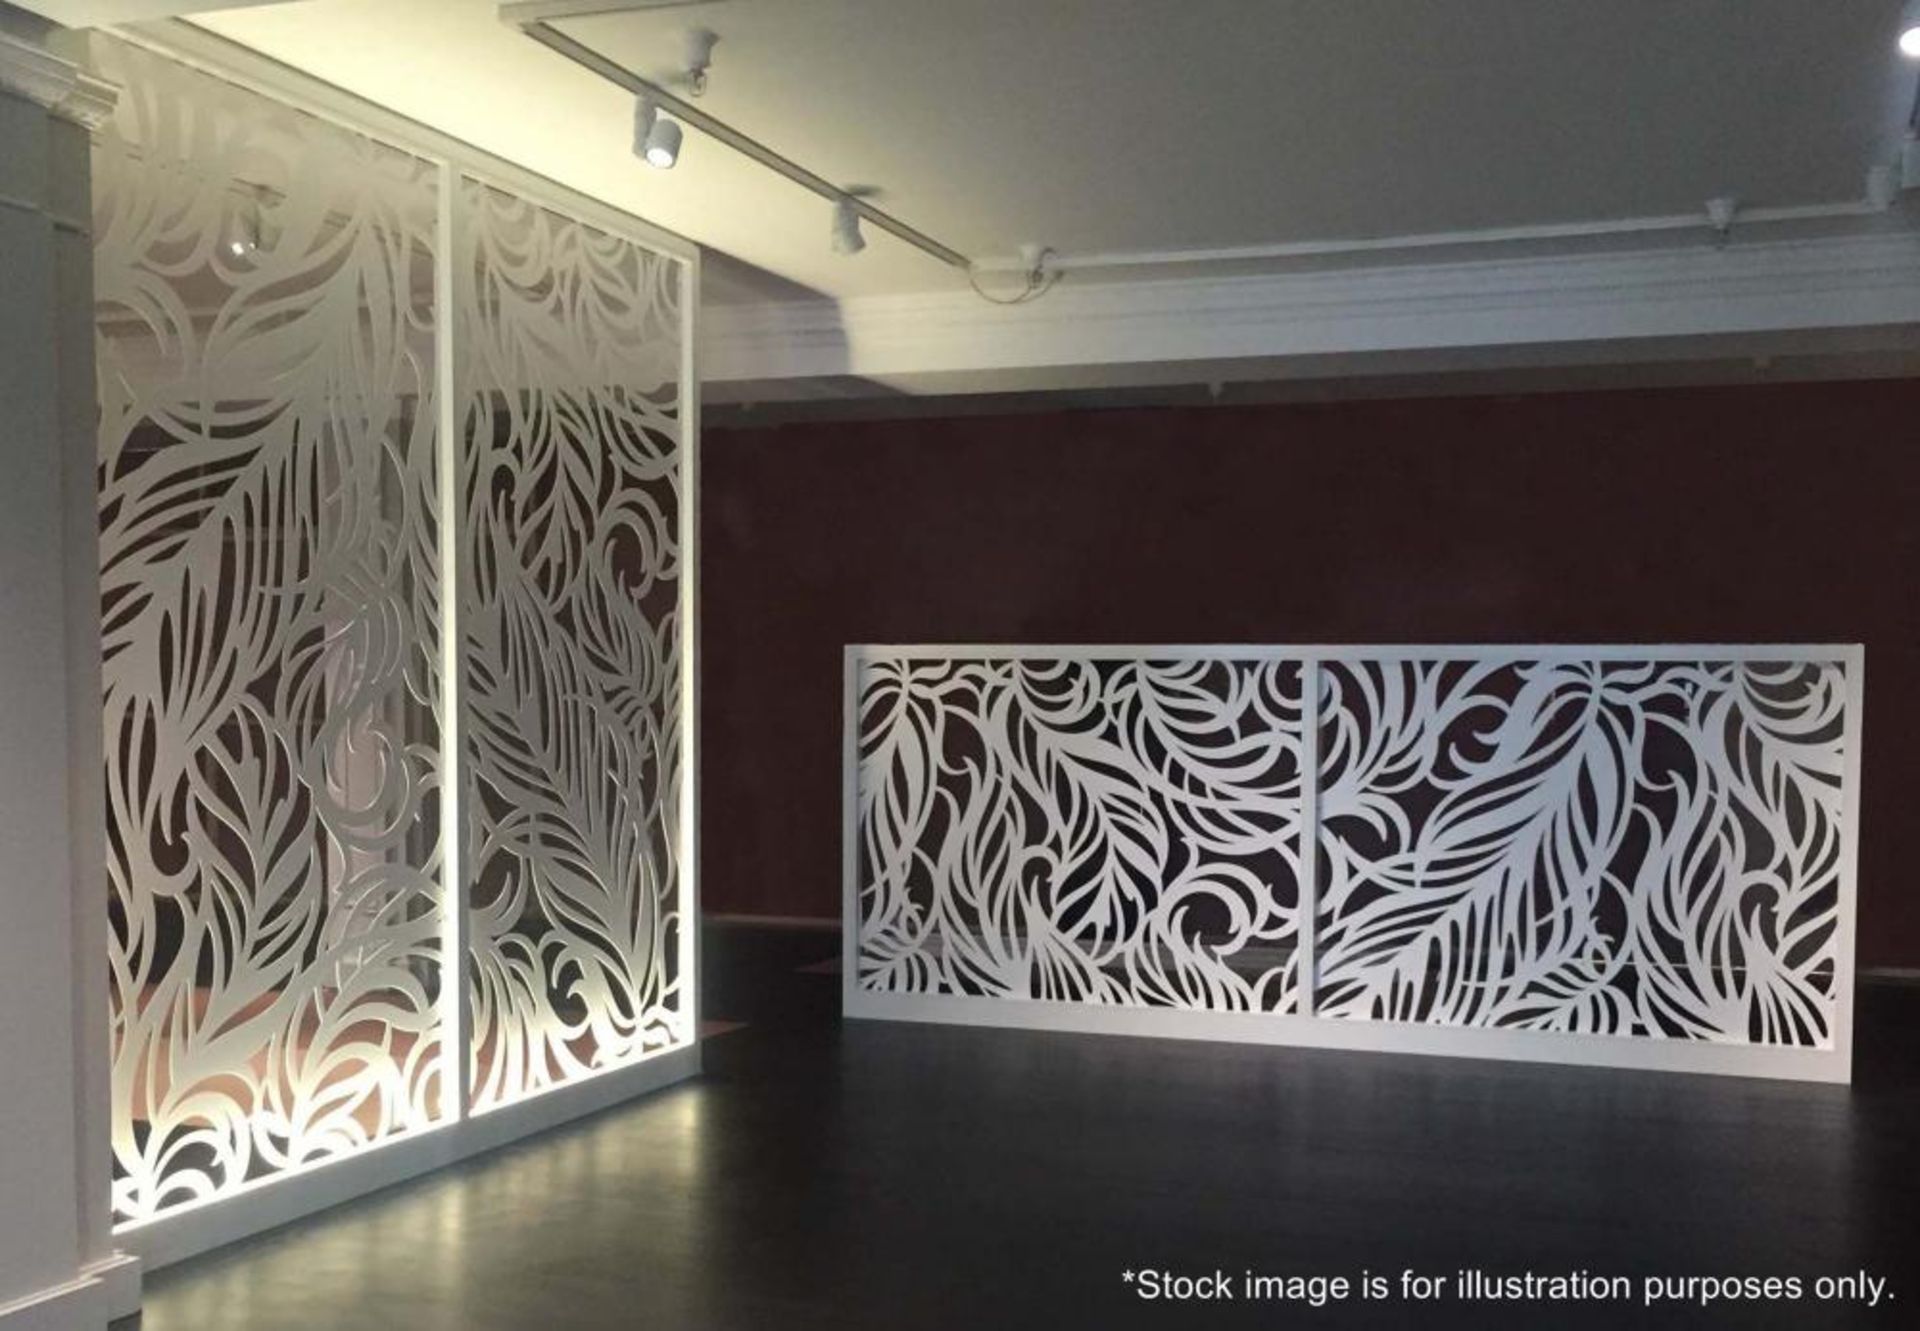 A Set Of 2 x Elegant 'Miles and Lincoln' Laser Cut Metal Room Divider Panels In A Feather Design -